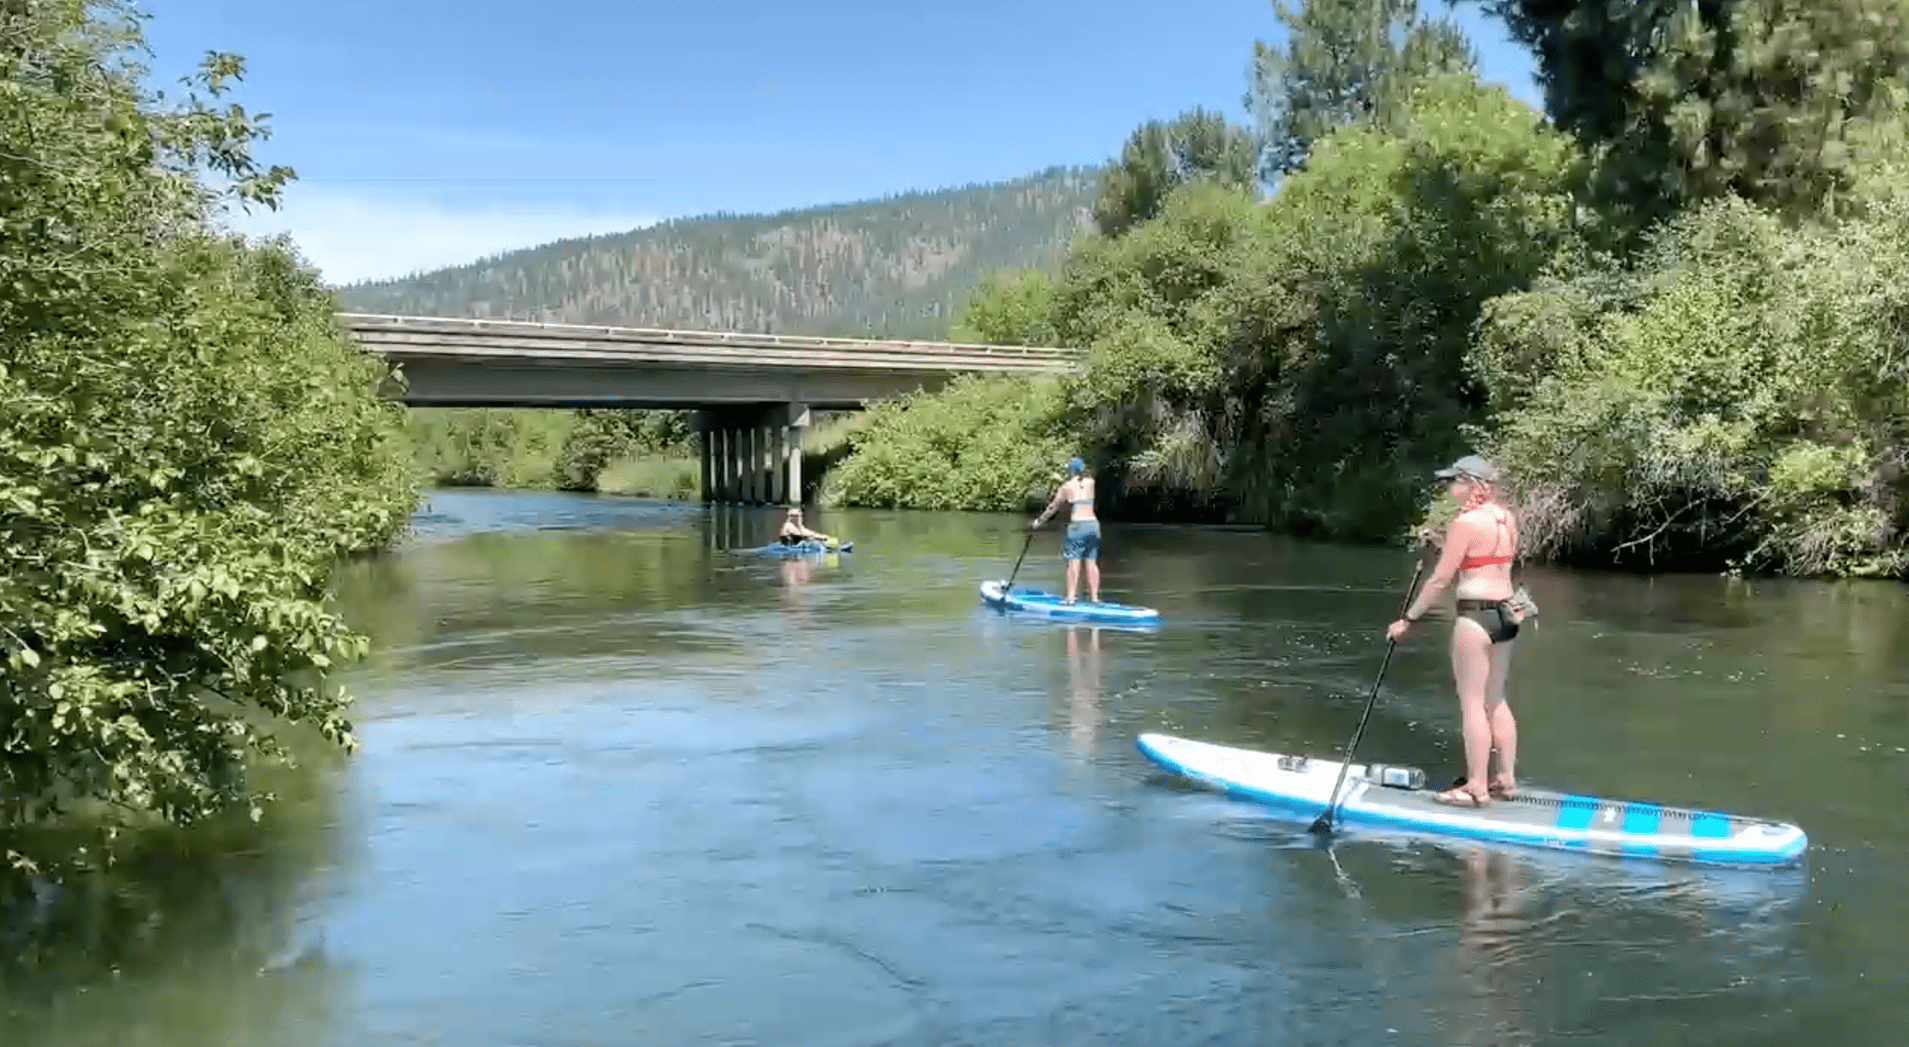 Two people paddle-boarding and one kayaking down a river.